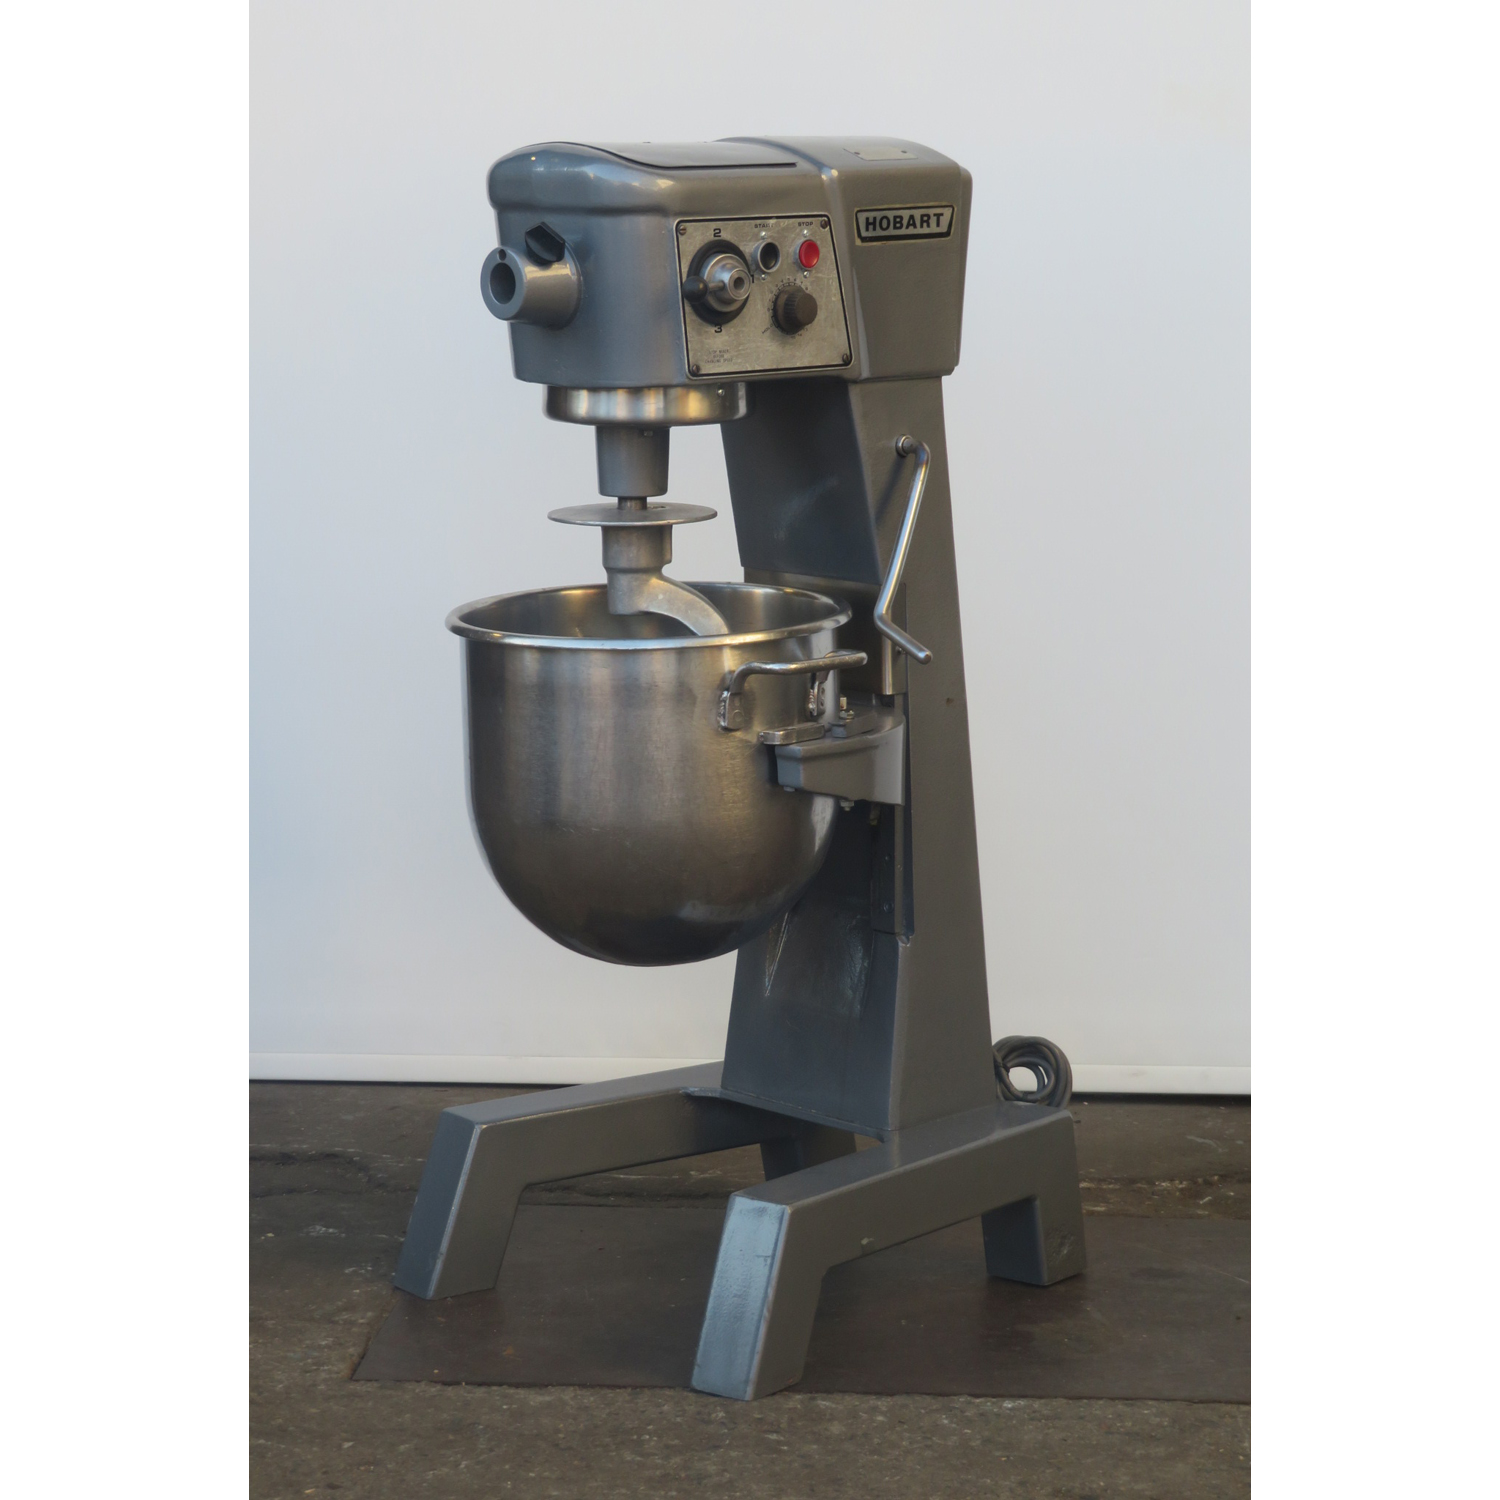 Hobart 30 Quart D300T Mixer, Used Great Condition